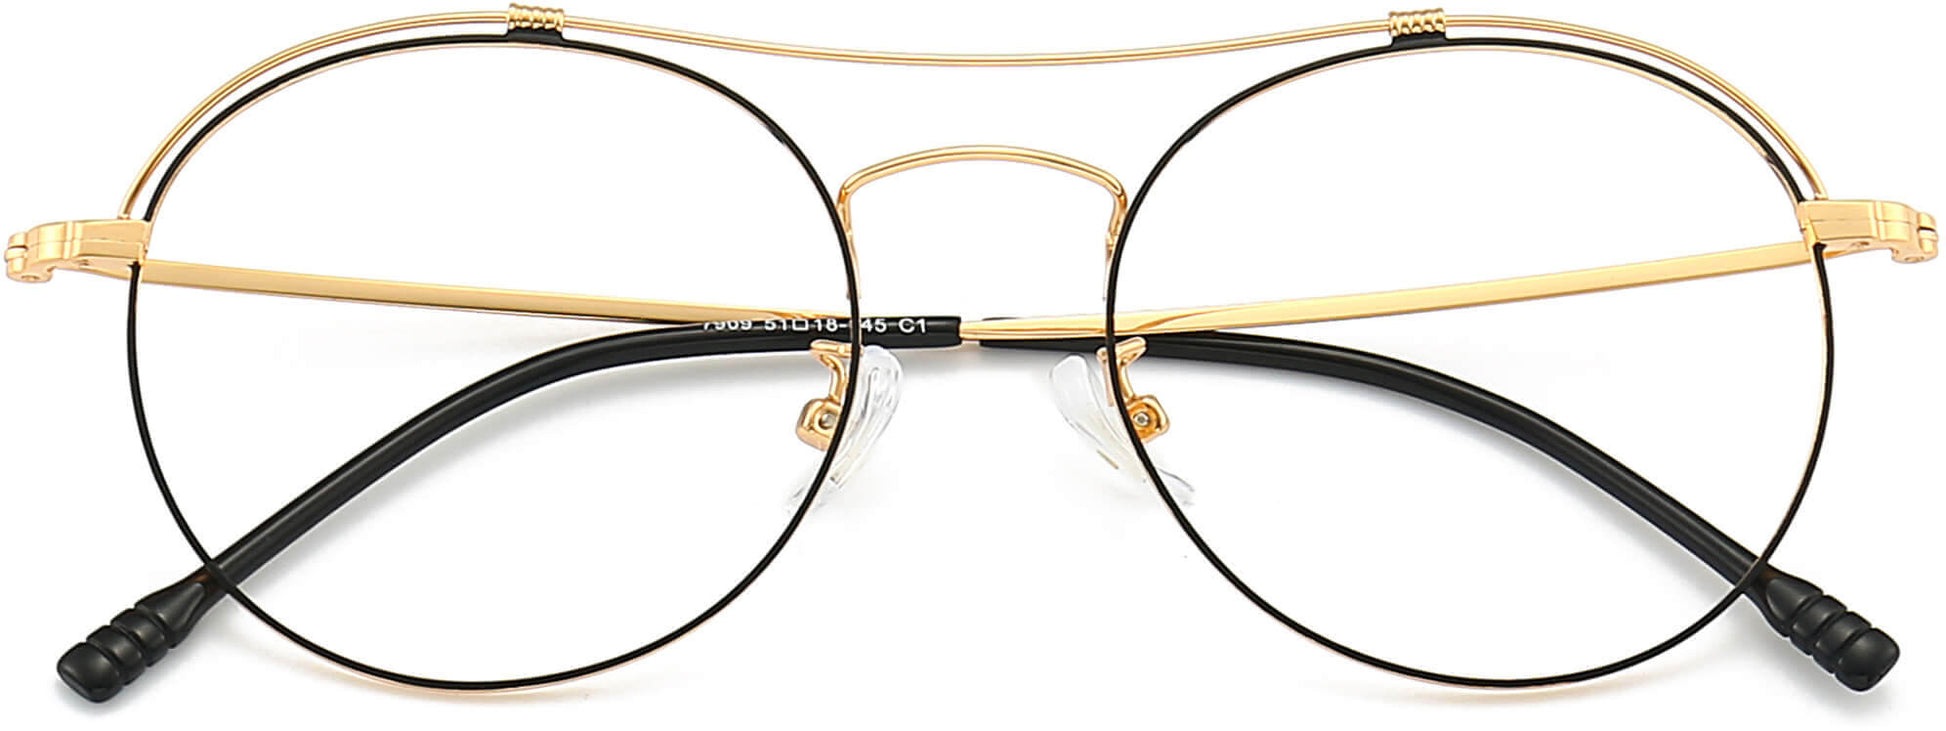 Colette Round Black Eyeglasses from ANRRI, closed view